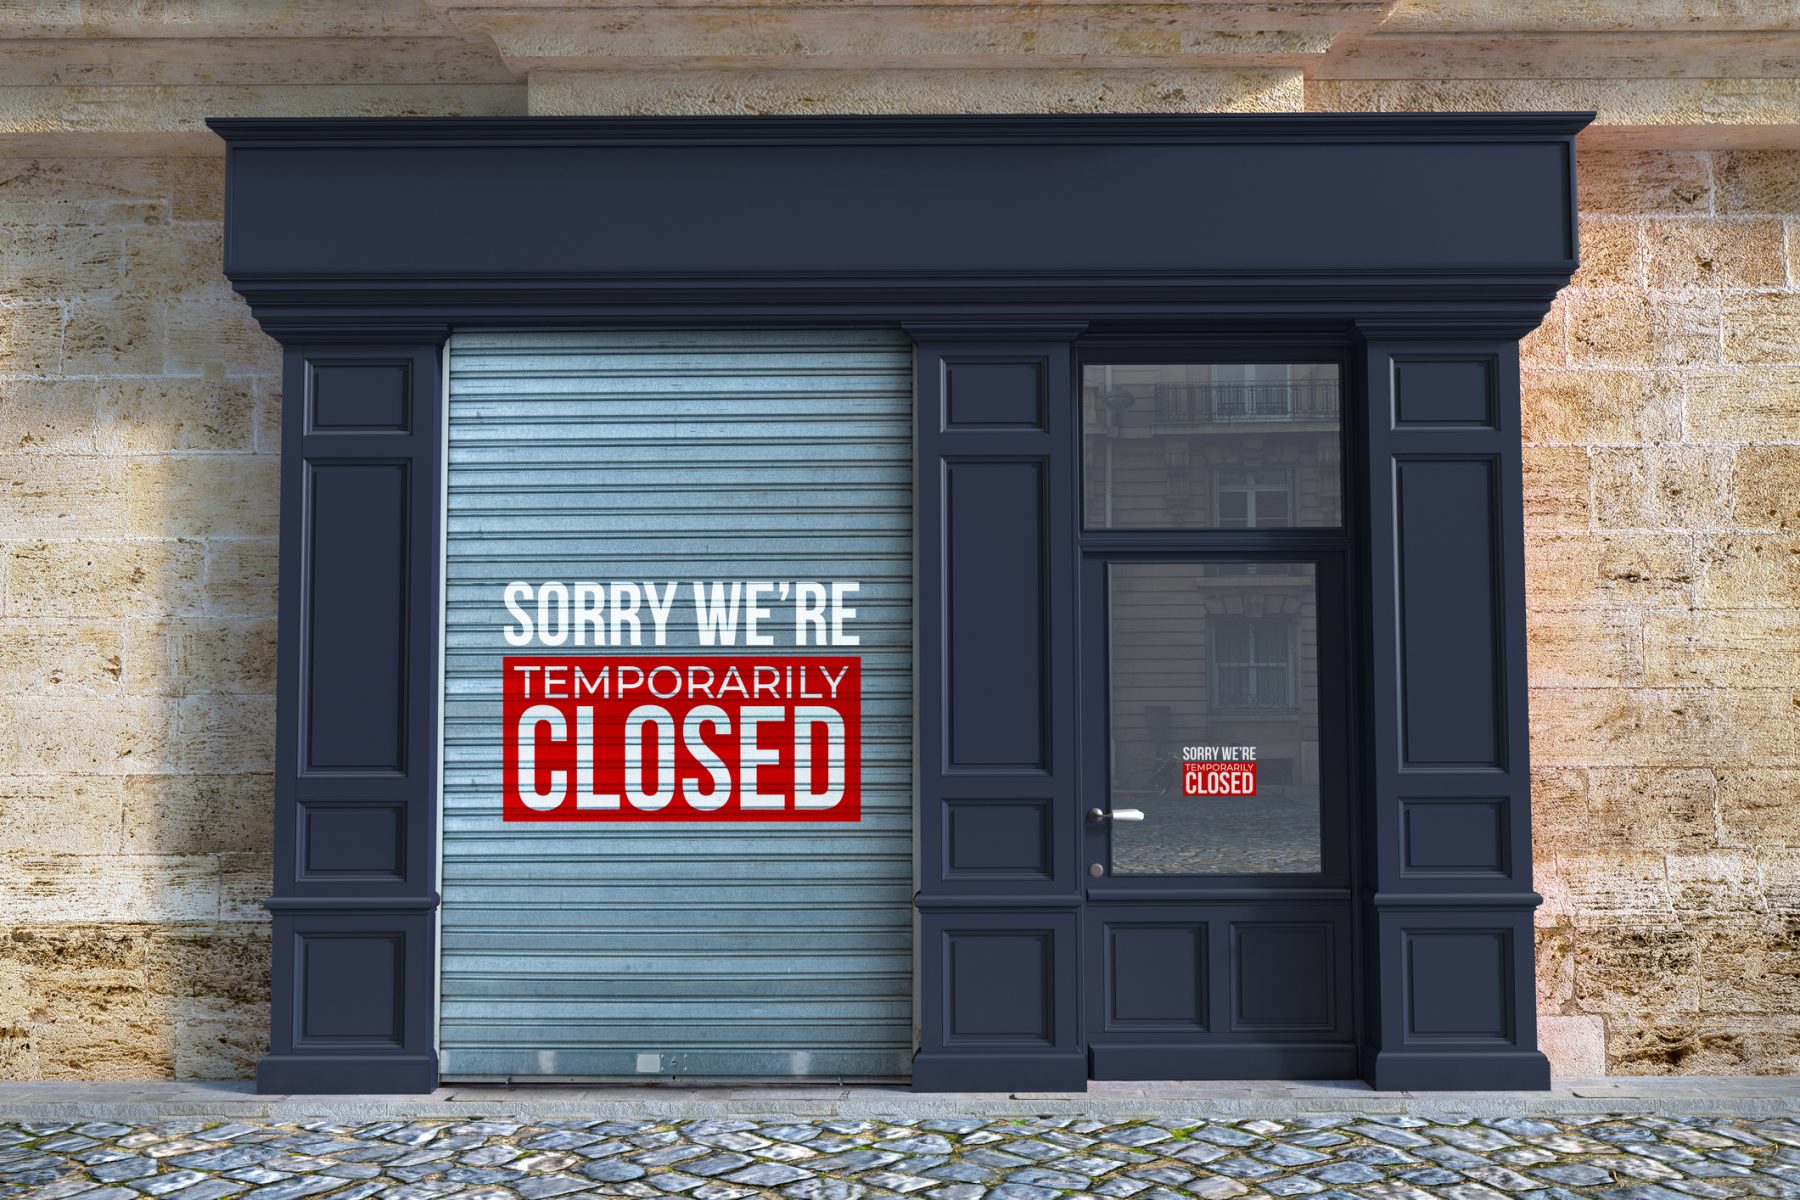 A business is closed down temporarily after being damaged by a natural disaster.